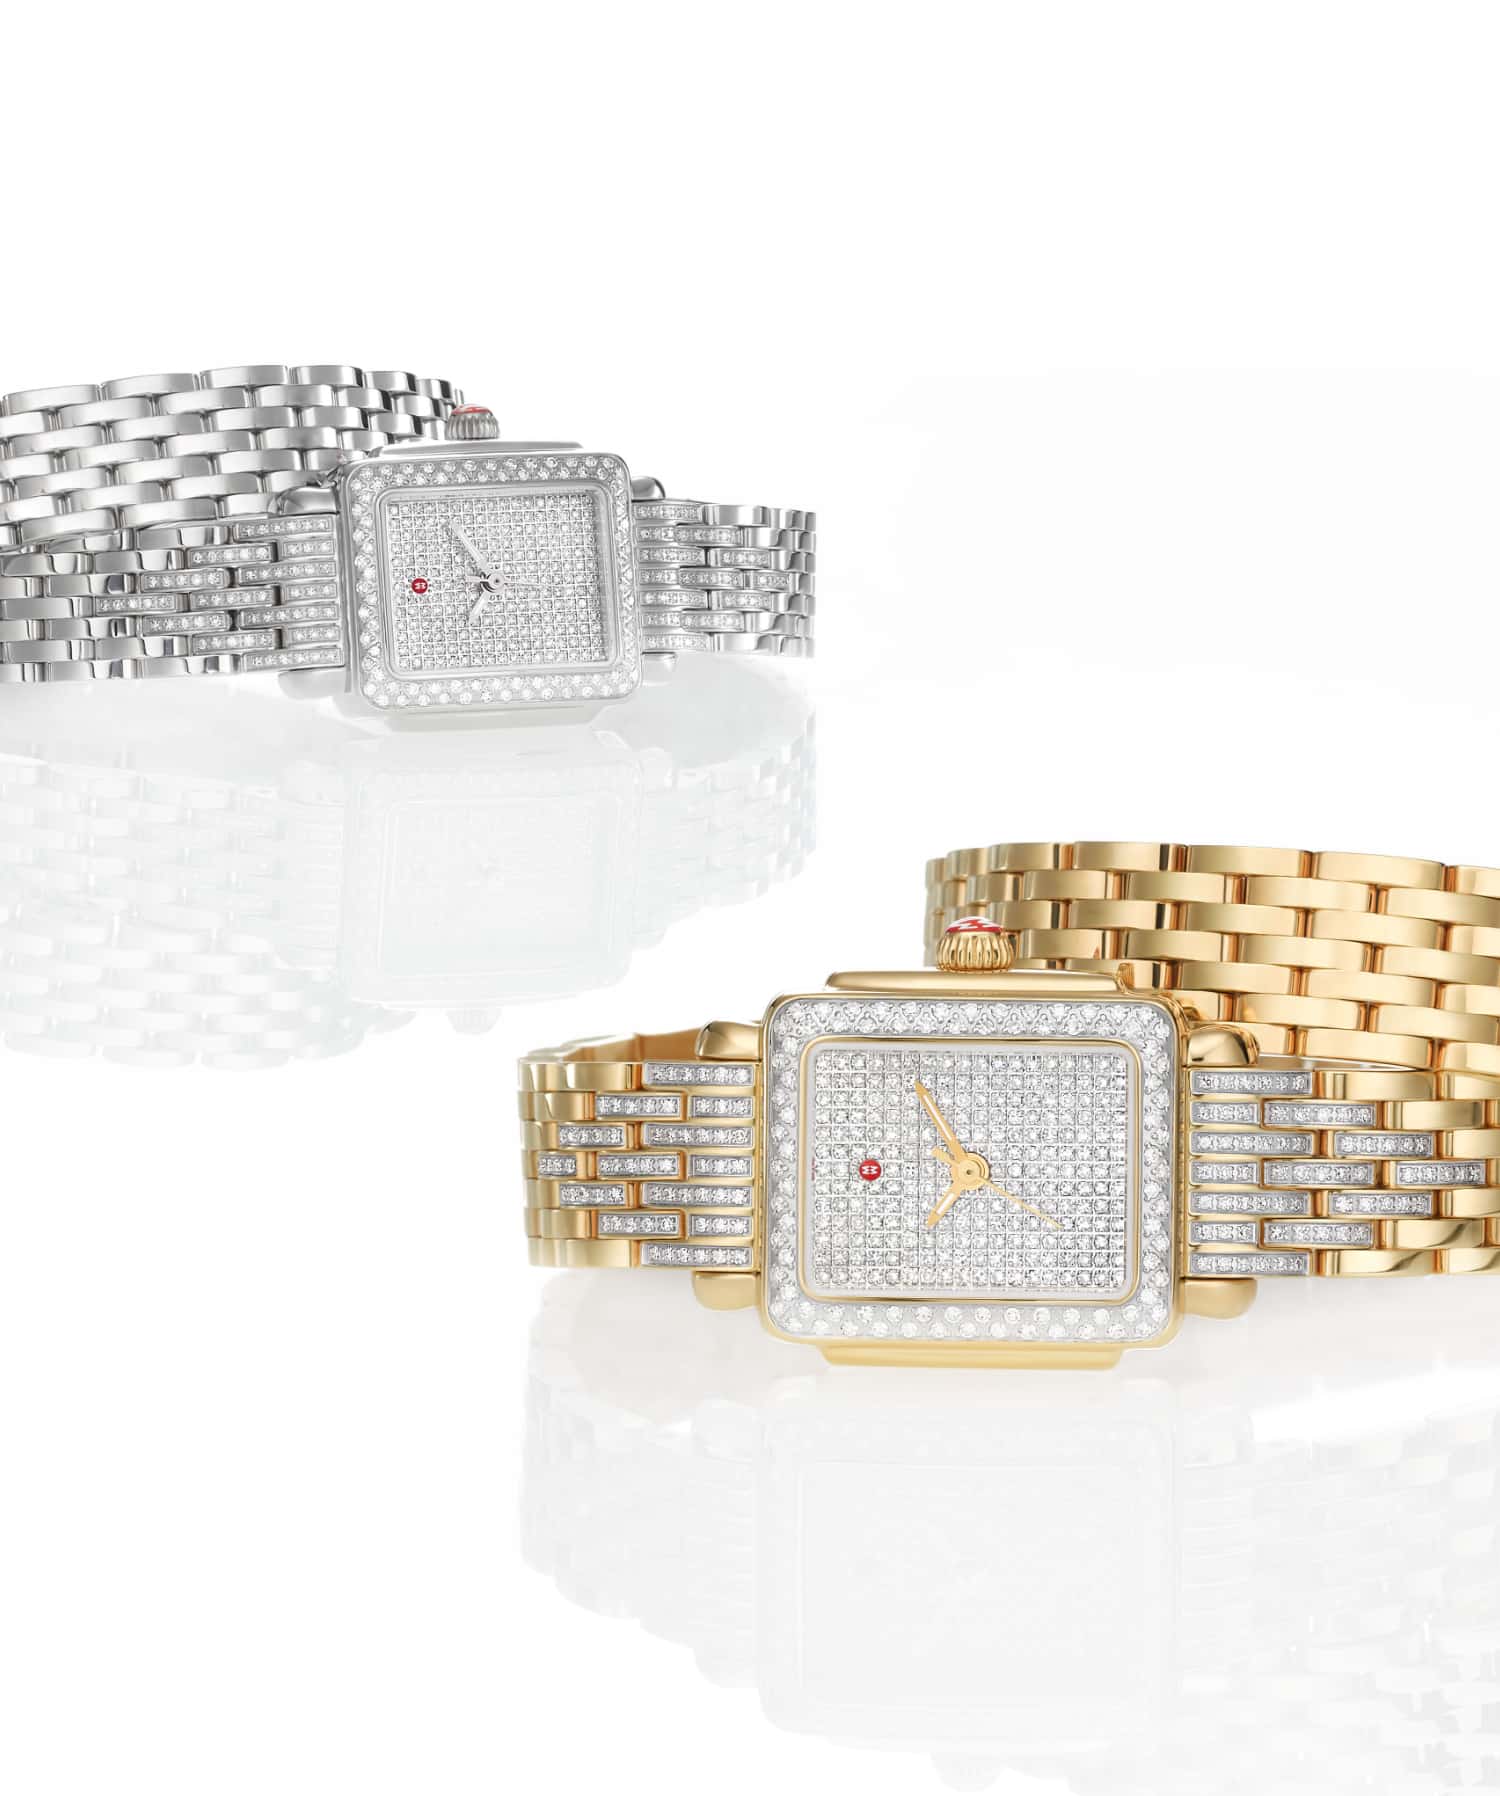 The Deco Madison Mini Pavé diamond watch with a 226-count pavé diamond dial and 210 hand-set diamonds along the case and a seven-link double wrap bracelet.